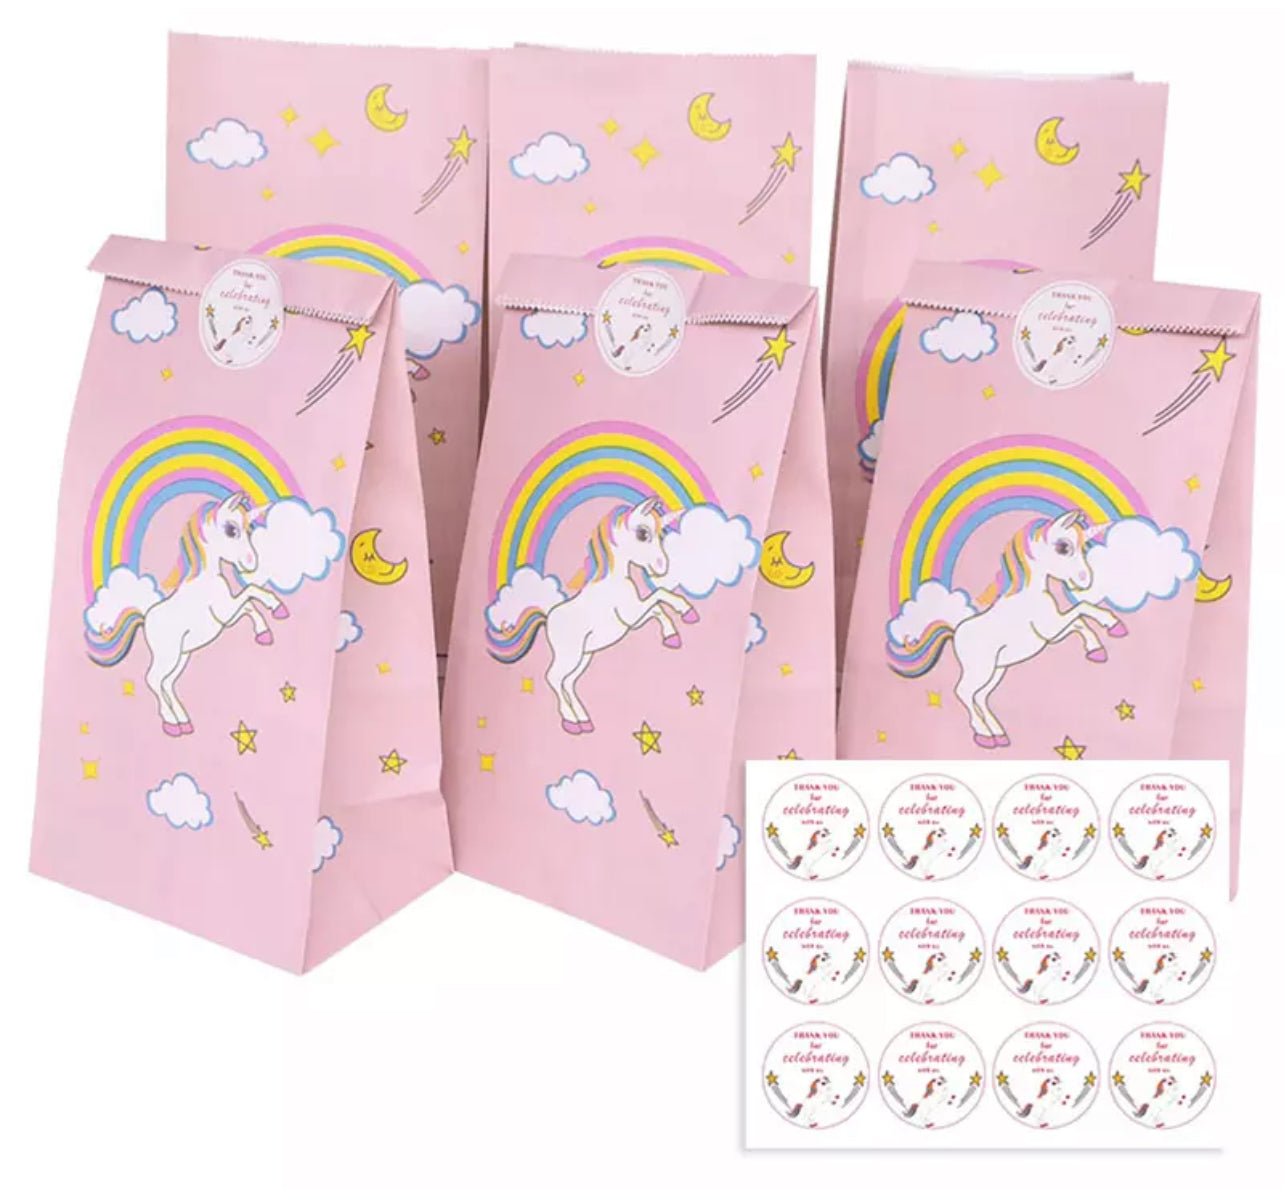 Goodie Bags,Candy Bags or Popcorn Bags, Rainbow Unicorn Birthday Theme 🦄 Disposable Tableware Set